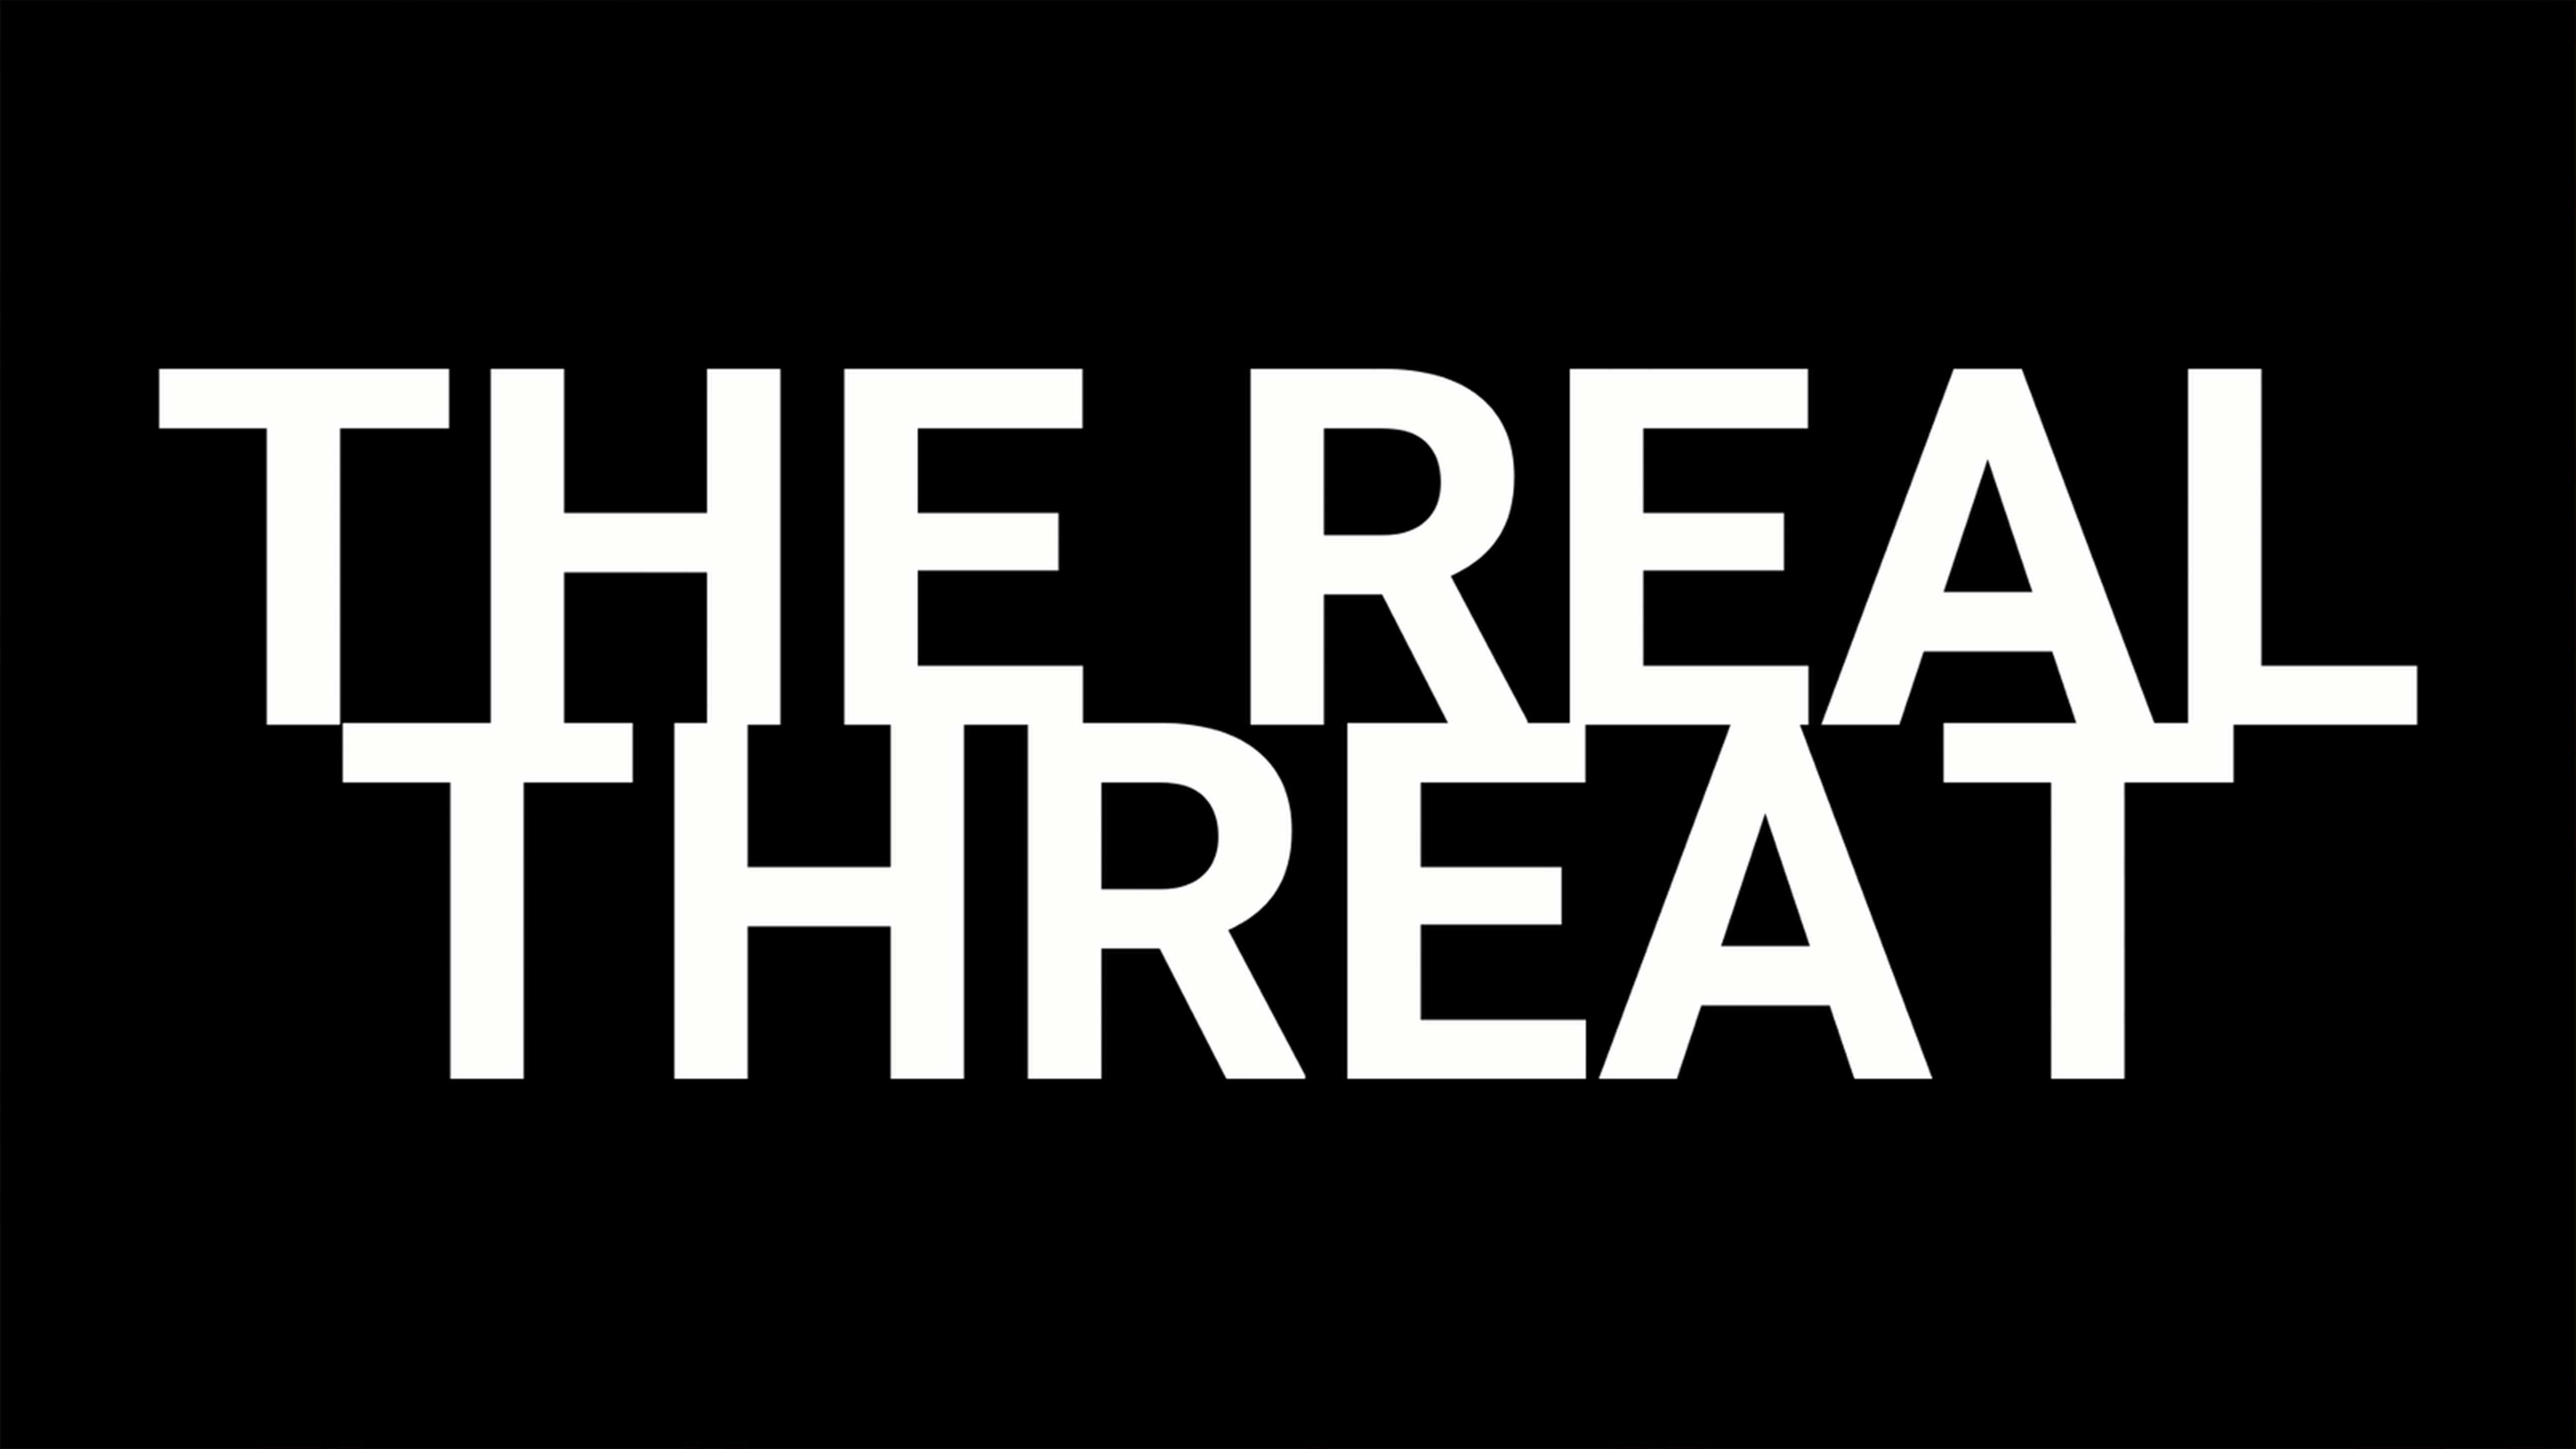 Video explaining The Real Threat campaign and showing images of campaign touchpoints.